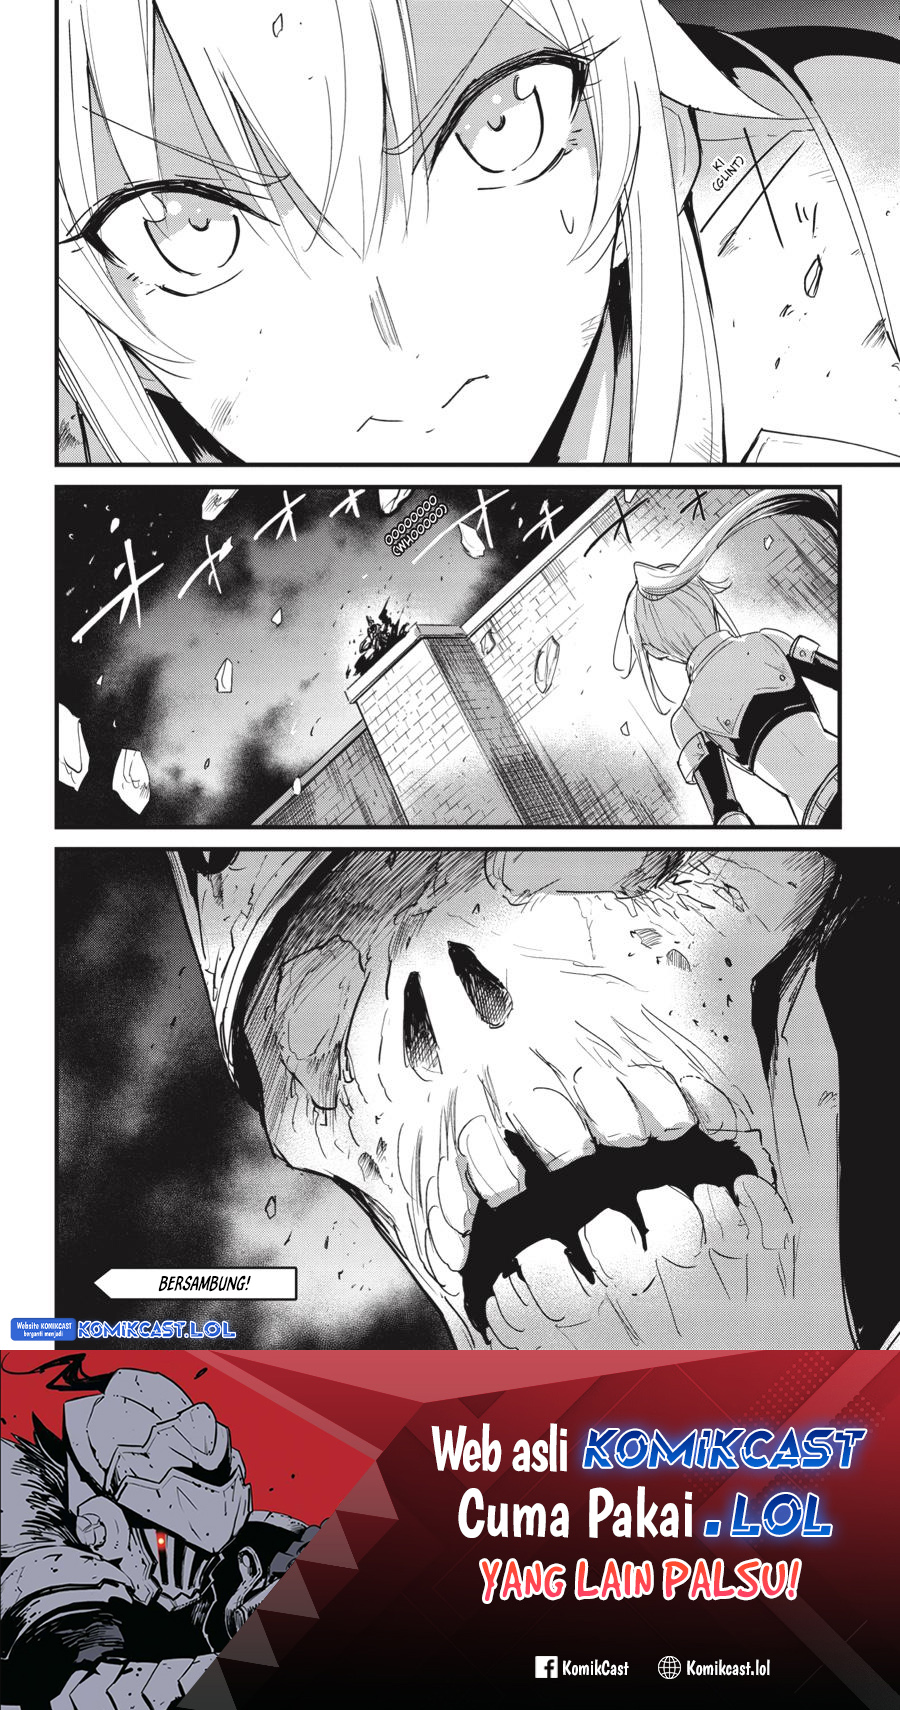 Goblin Slayer Side Story Year One Chapter 74